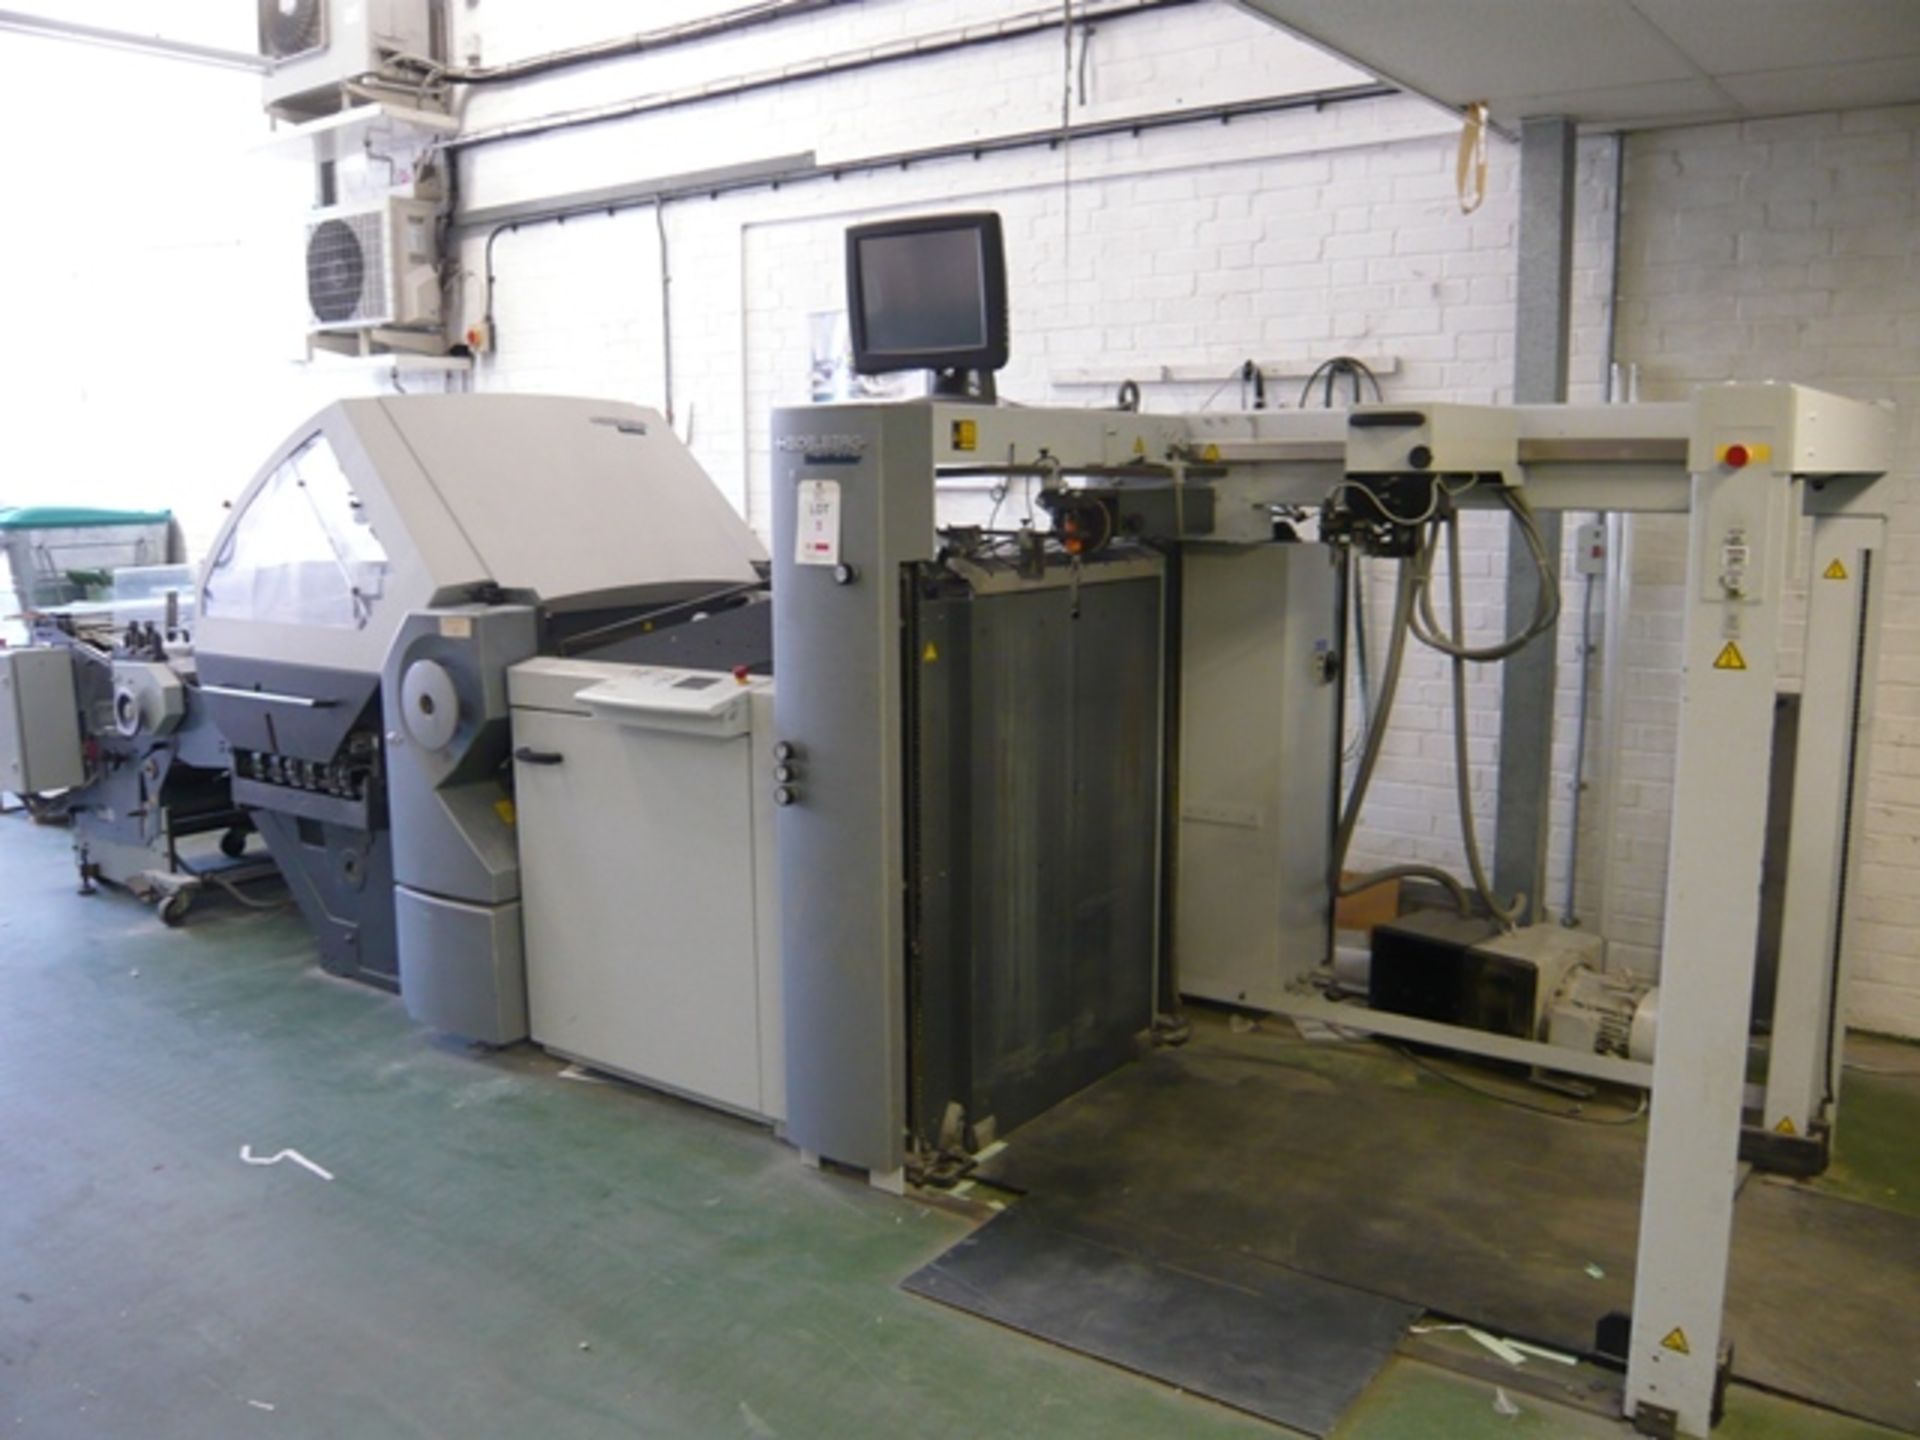 Heidelberg Stahl folder TH/KH 82 size automatic combination folding machine with High pile suction